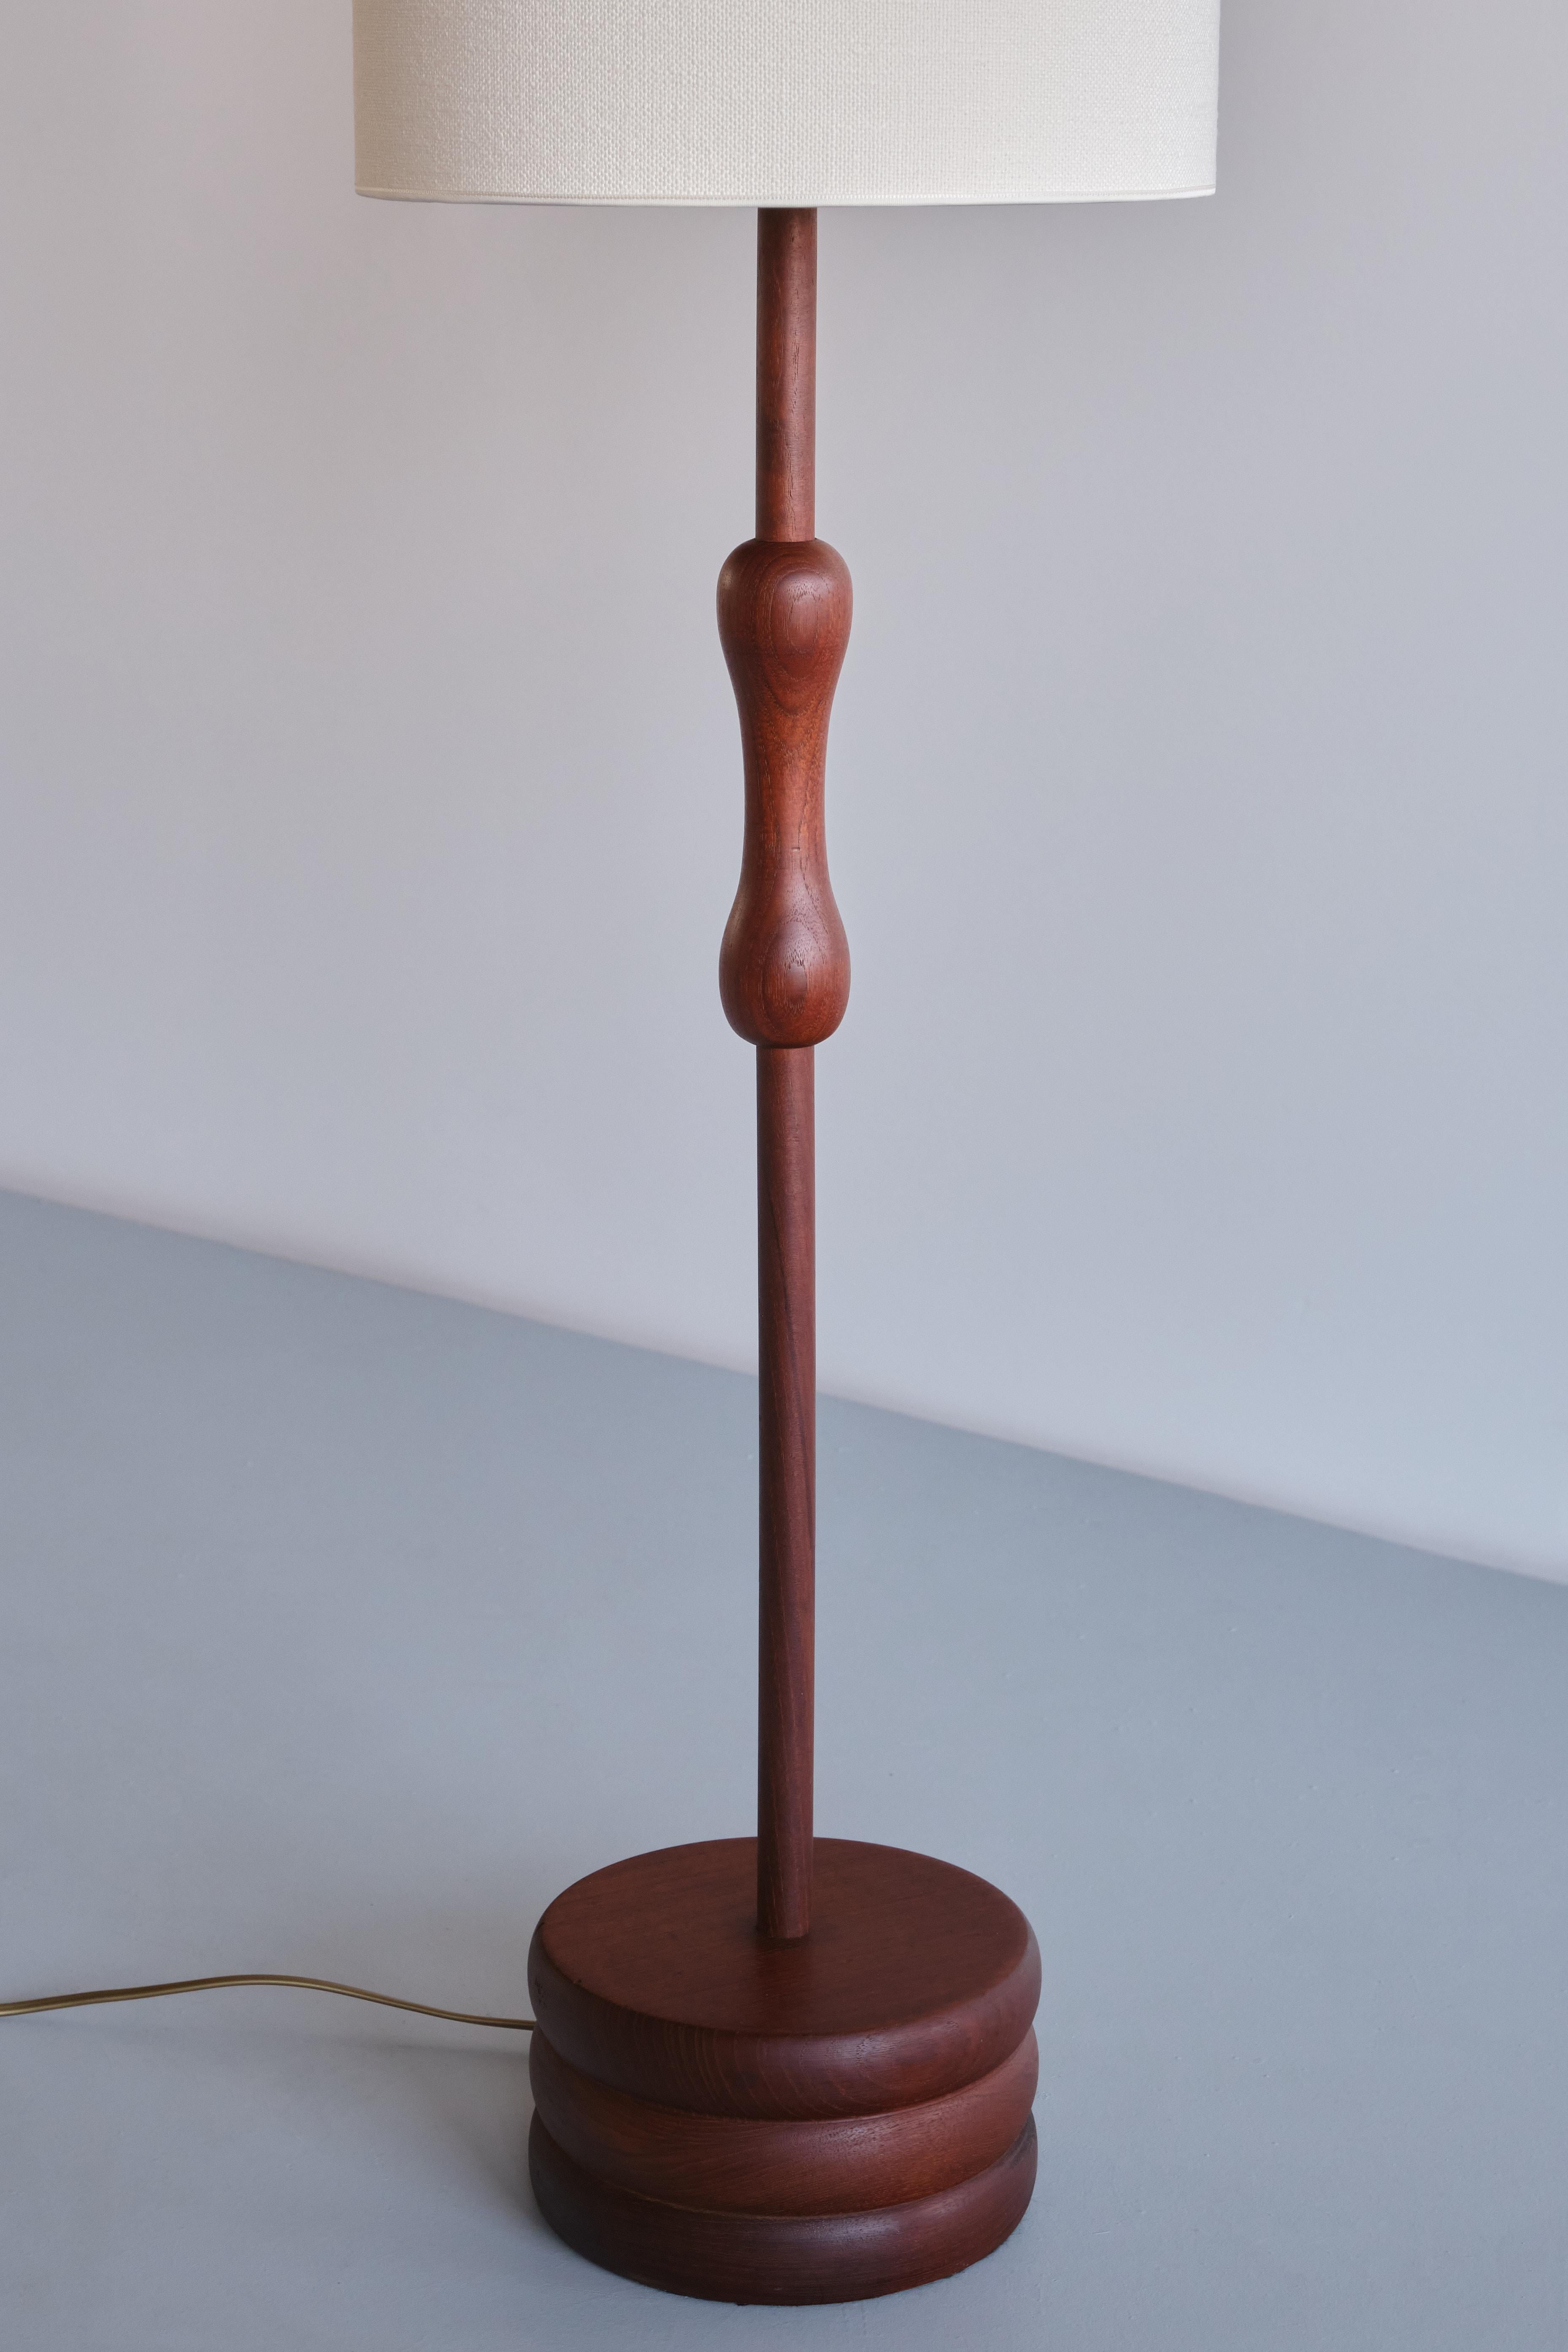 Organic Modern Floor / Table Lamp in Solid Teak Wood, Sweden, 1950s In Good Condition For Sale In The Hague, NL